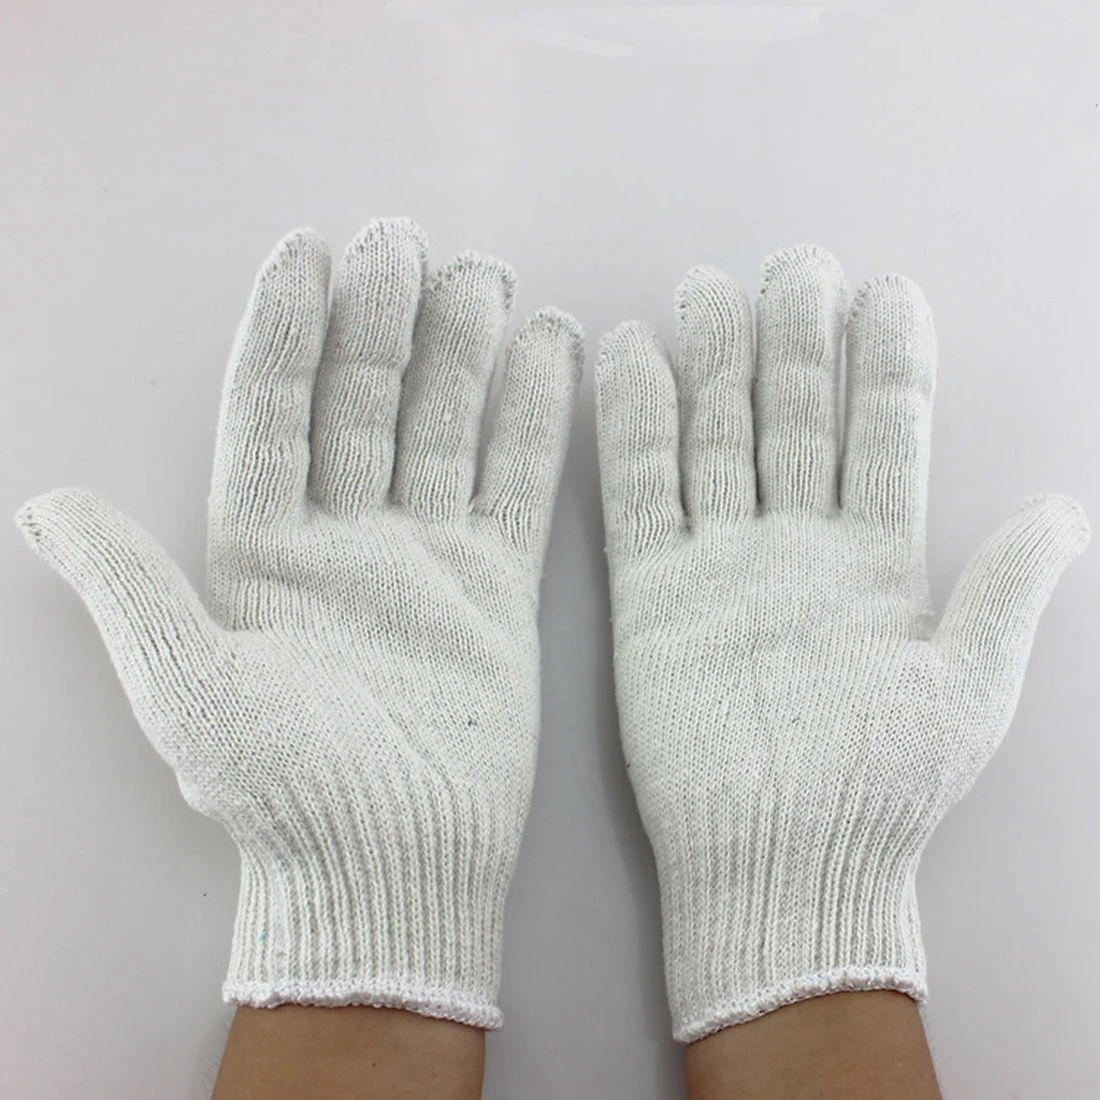 

Dewtreetali 1Pair Soft Comfortable White Cotton Yarn Working Protection Gloves Car Repair Security Tool Garden Labor Gloves